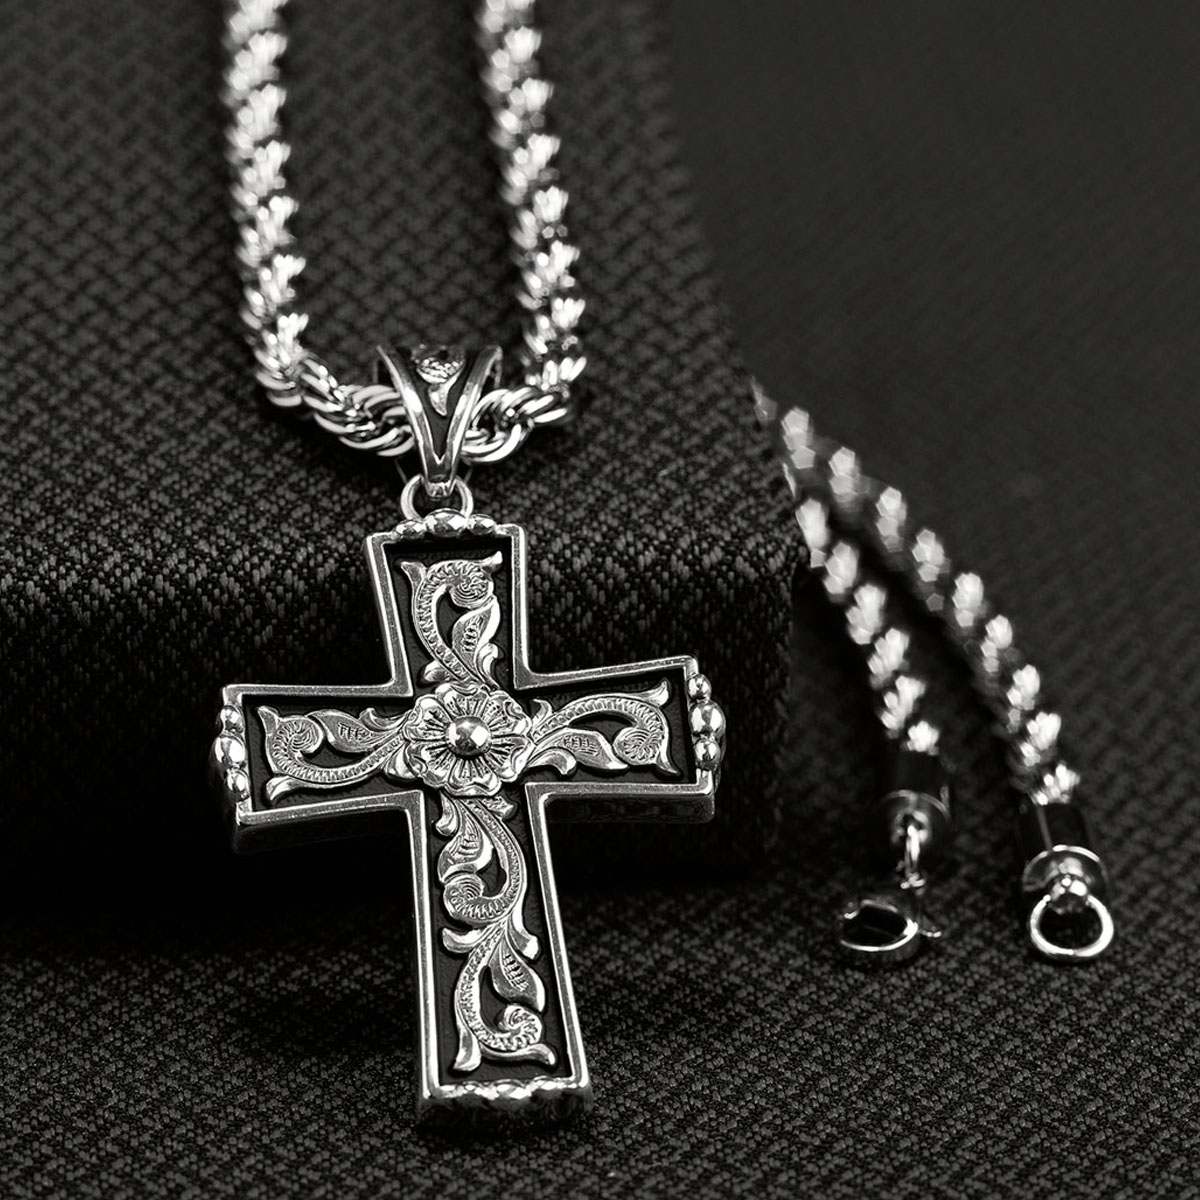 32110 Mens Scrolled Cross Necklace - 24 In.